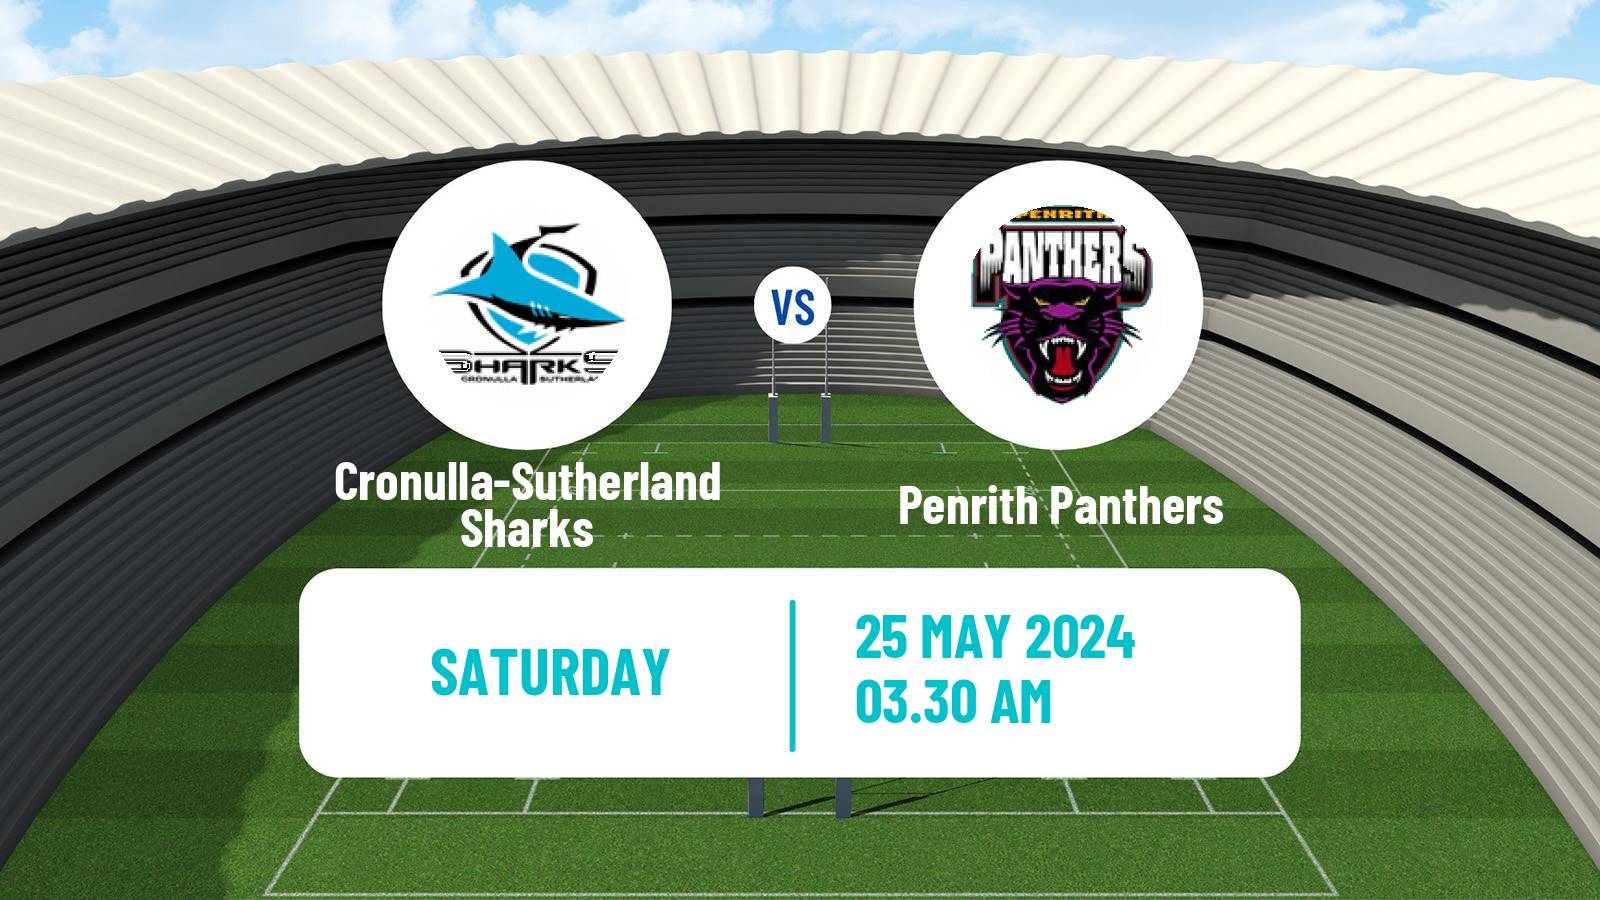 Rugby league Australian NRL Cronulla-Sutherland Sharks - Penrith Panthers